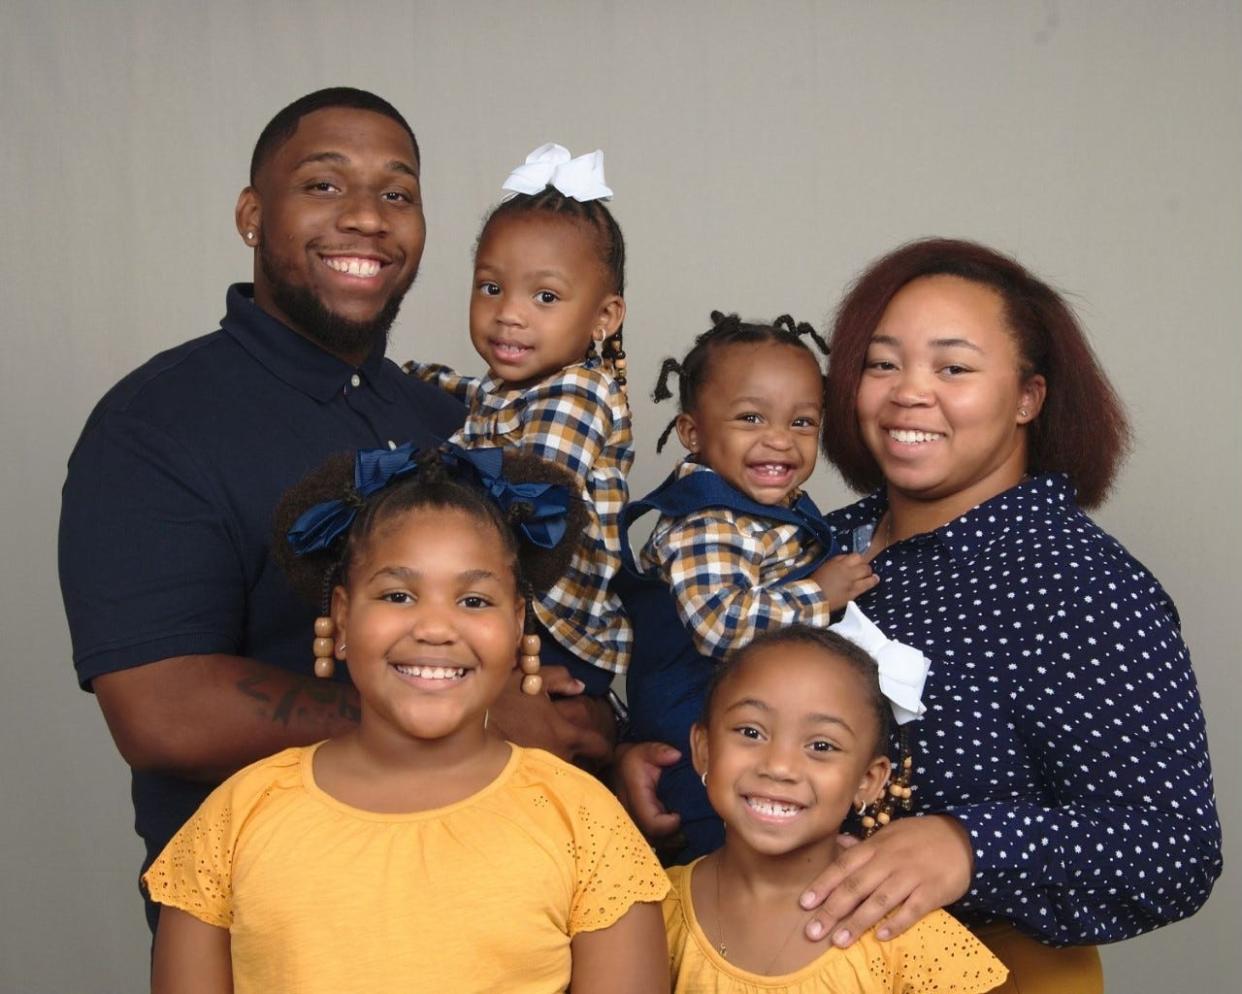 David Thorpe, Sr., (in the Navy Blue shirt) is shown in this photo with his 3 children, fiancee Teryana Frost, and niece. Thorpe, 28, was killed in a T-Bone style crash at Mason Avenue and  Bill France Boulevard as he was driving home from work, his family said. The crash occurred less than a block from where he worked, his fiancee said.